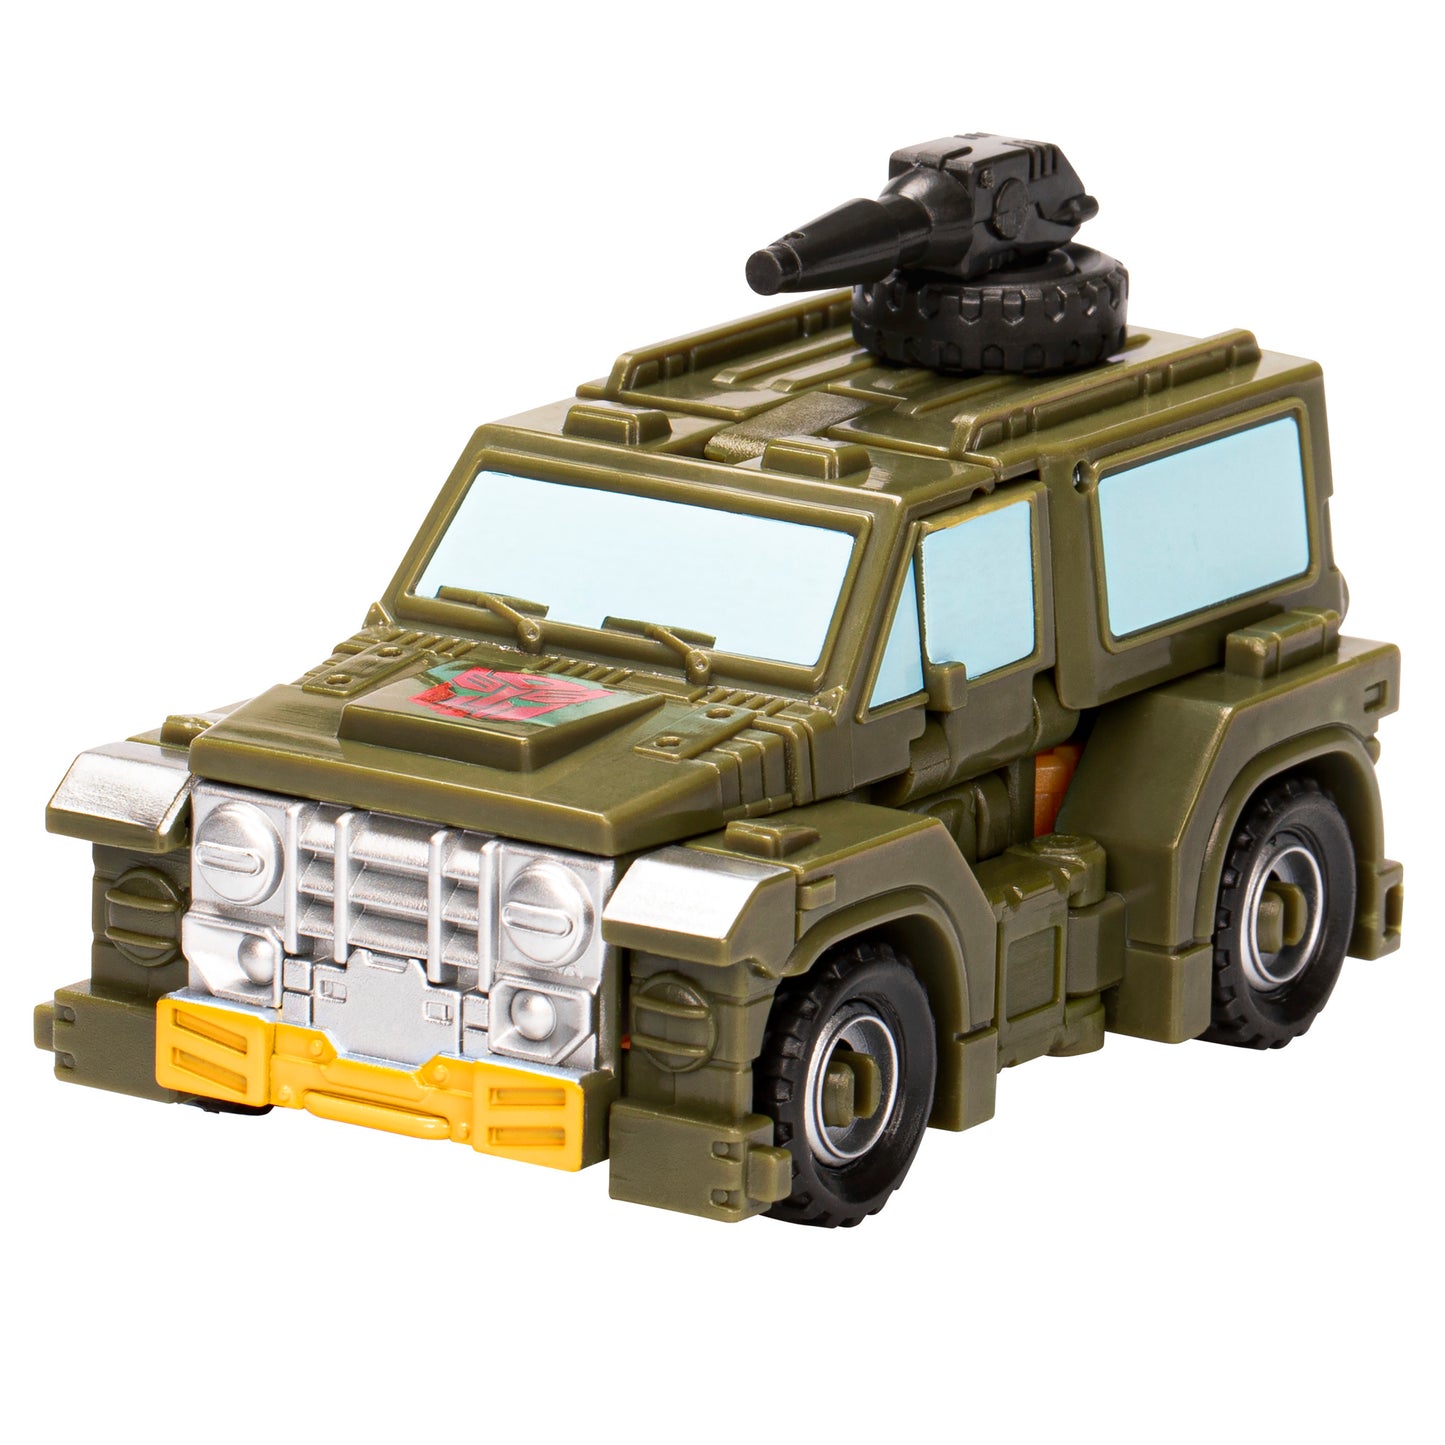 Transformers Studio Series Deluxe The Transformers: The Movie 86-22 Brawn transformers in truck - Heretoserveyou